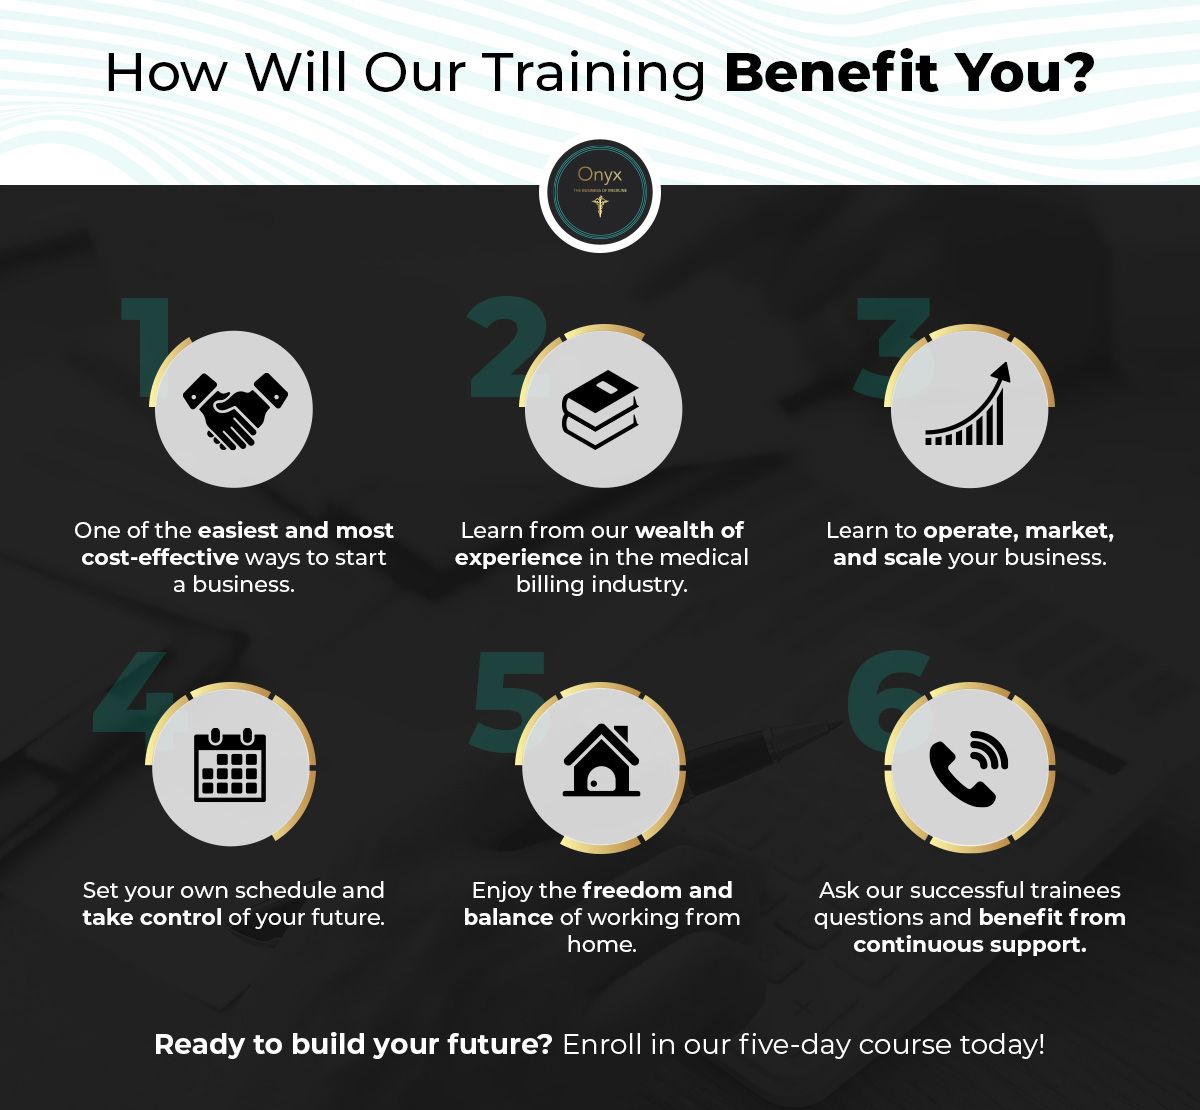 How Will Our Training Benefit You Infographic